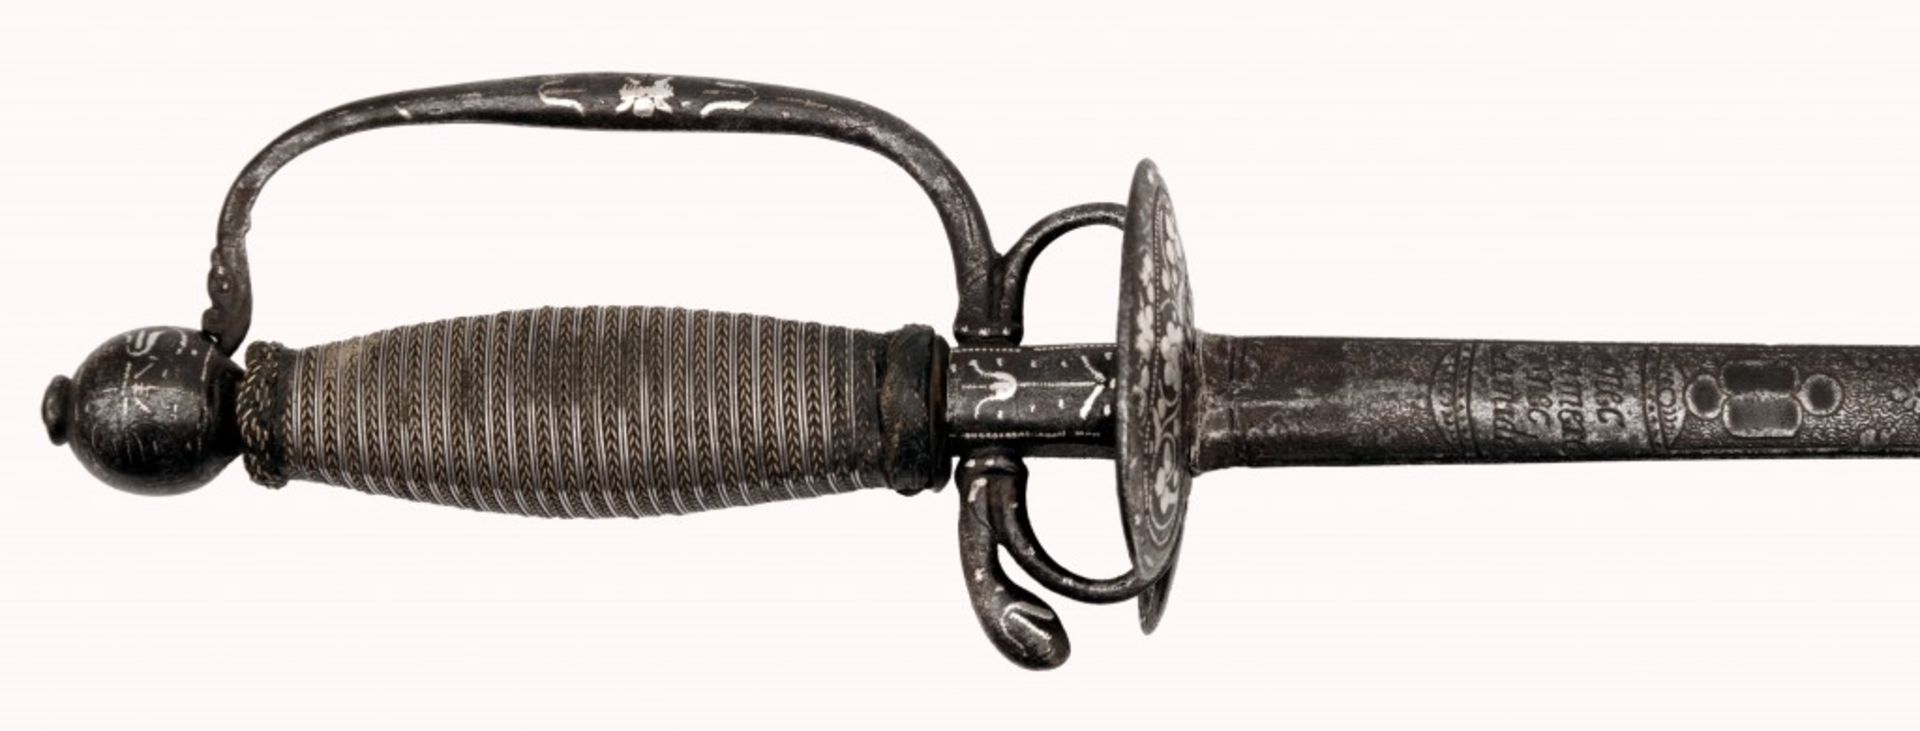 A Small-sword with Silver-inlaid Hilt - Image 3 of 7